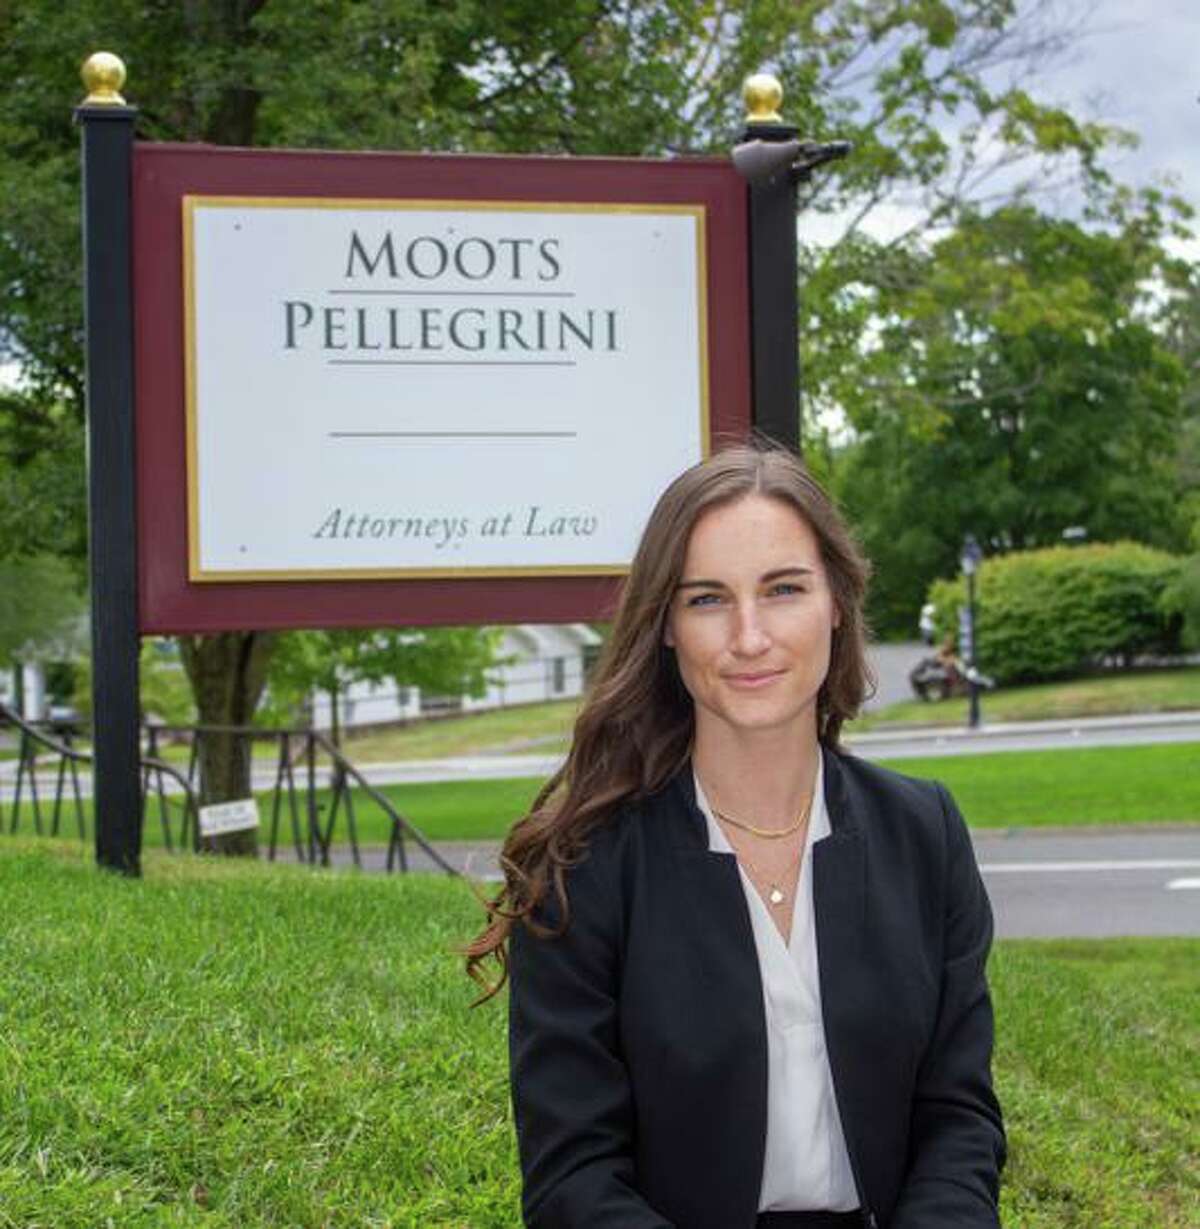 Attorney Jessica Cochrane, a New Milford High School graduate, is part way through her first year at the law firm of Moots Pellegrini in New Milford.